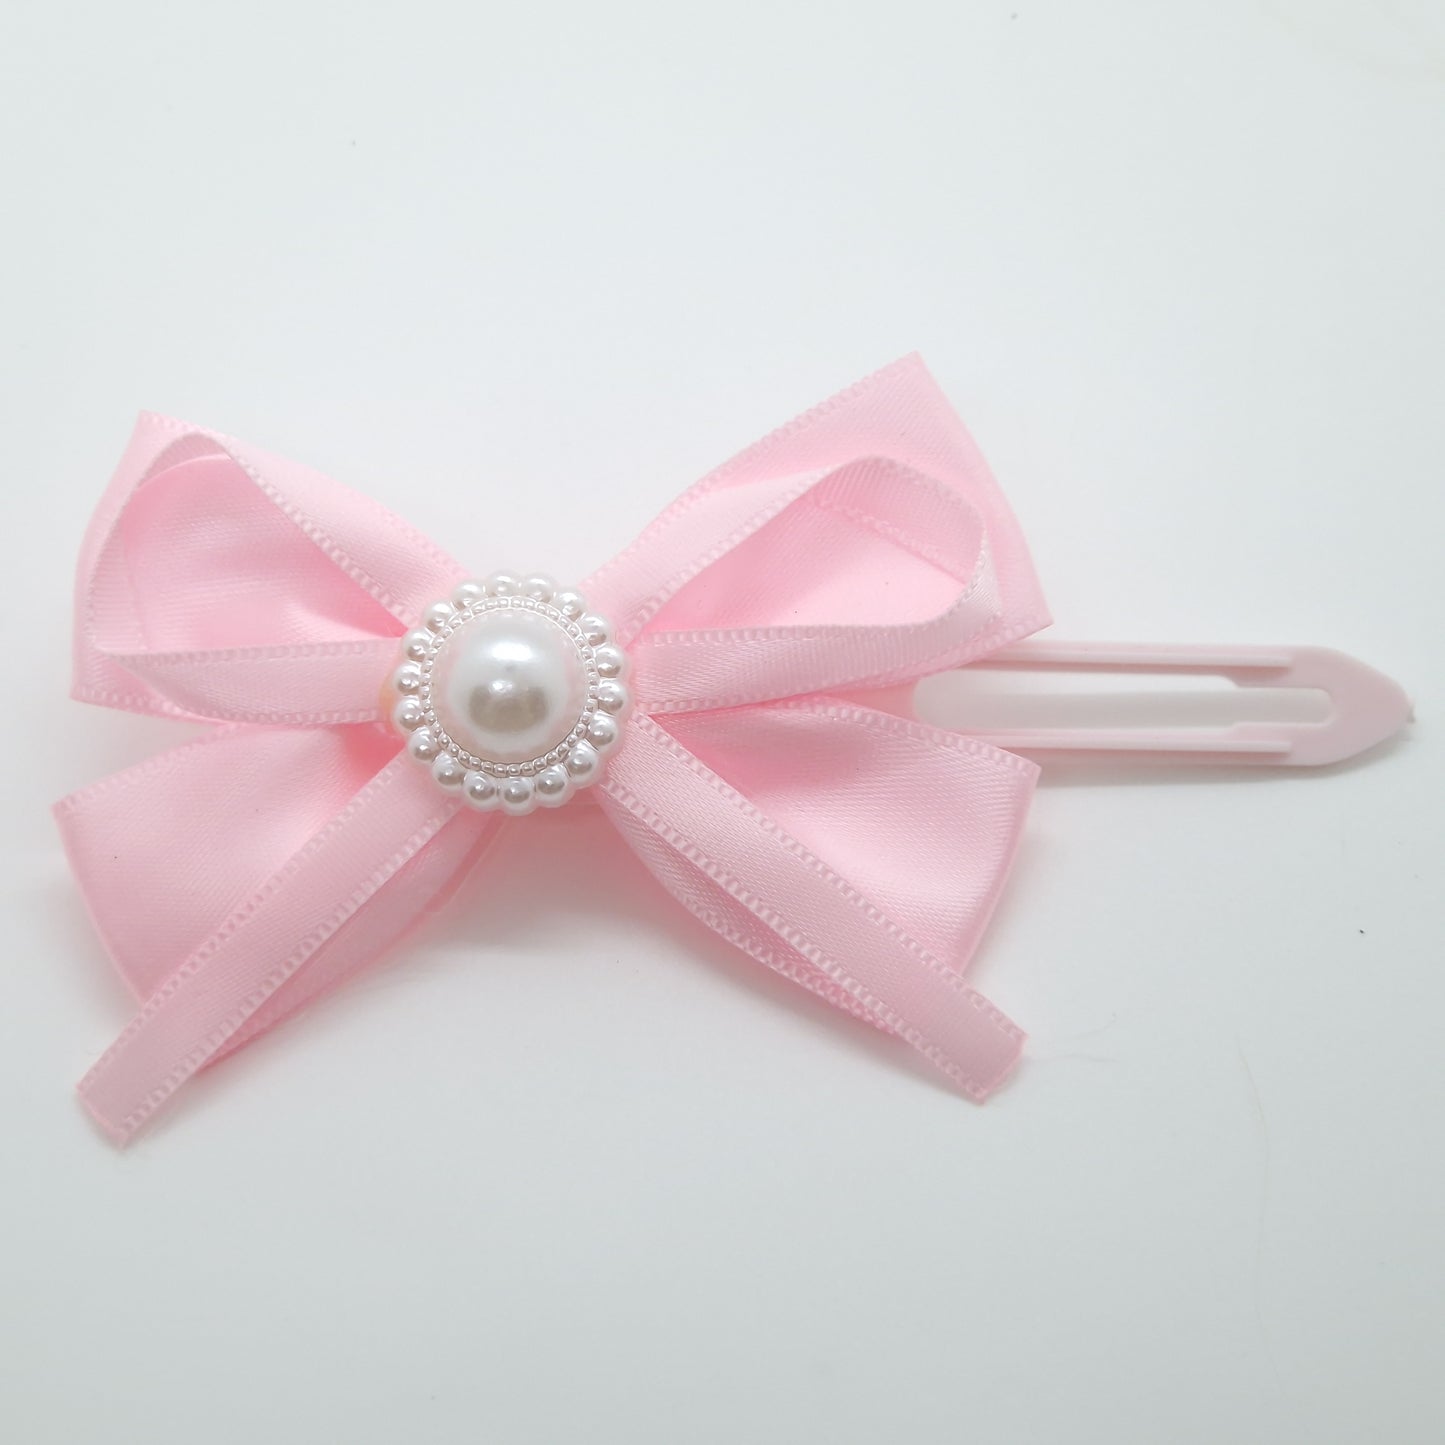 Soft Ribbon Bow With Pearl Center on 4.5cm Clip